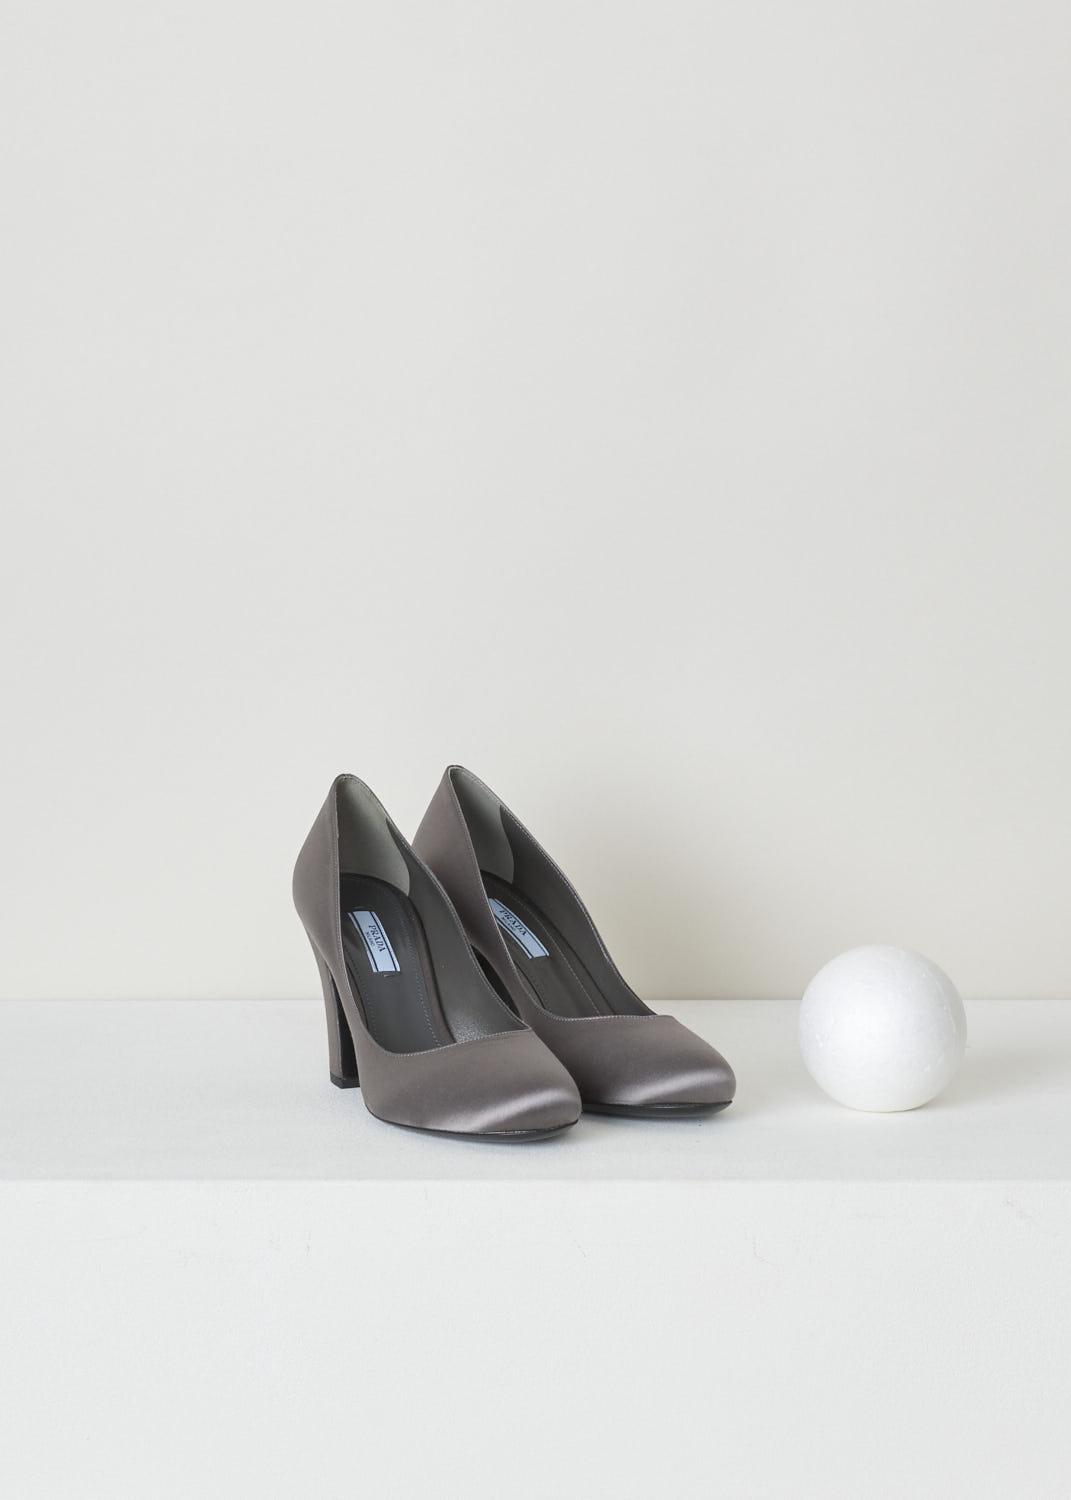 PRADA, GREY SATIN PUMP, 1I840L_RASO_F0480_ARDESIA, Grey, Silver, Front, Classic grey pumps with a satin look. This model features a rounded toe box and a sturdy block heel.

Heel height: 8 cm / 3.14 inch.
